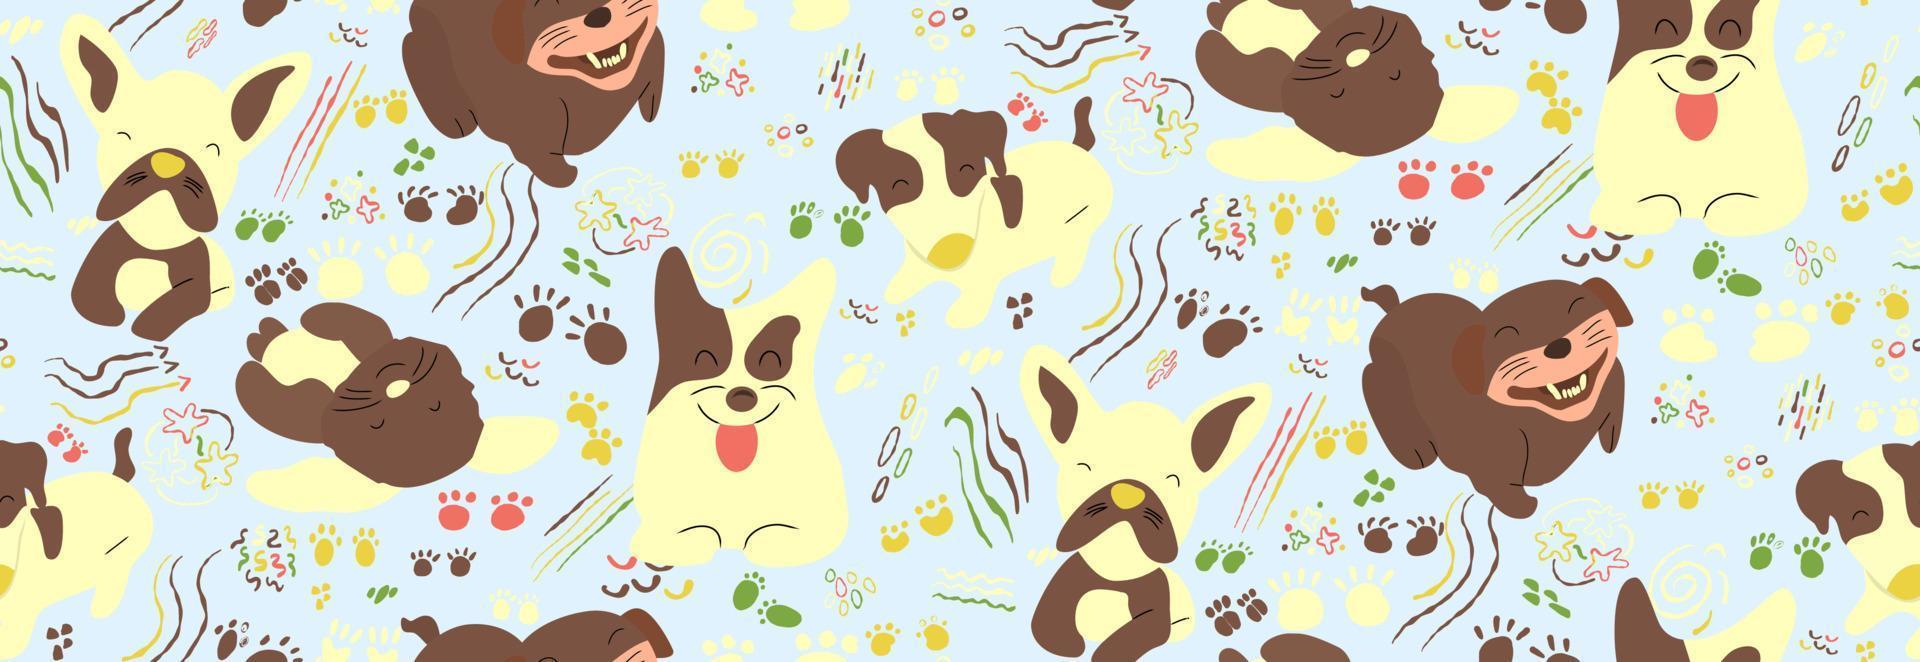 seamless pattern dog for kids theme vector